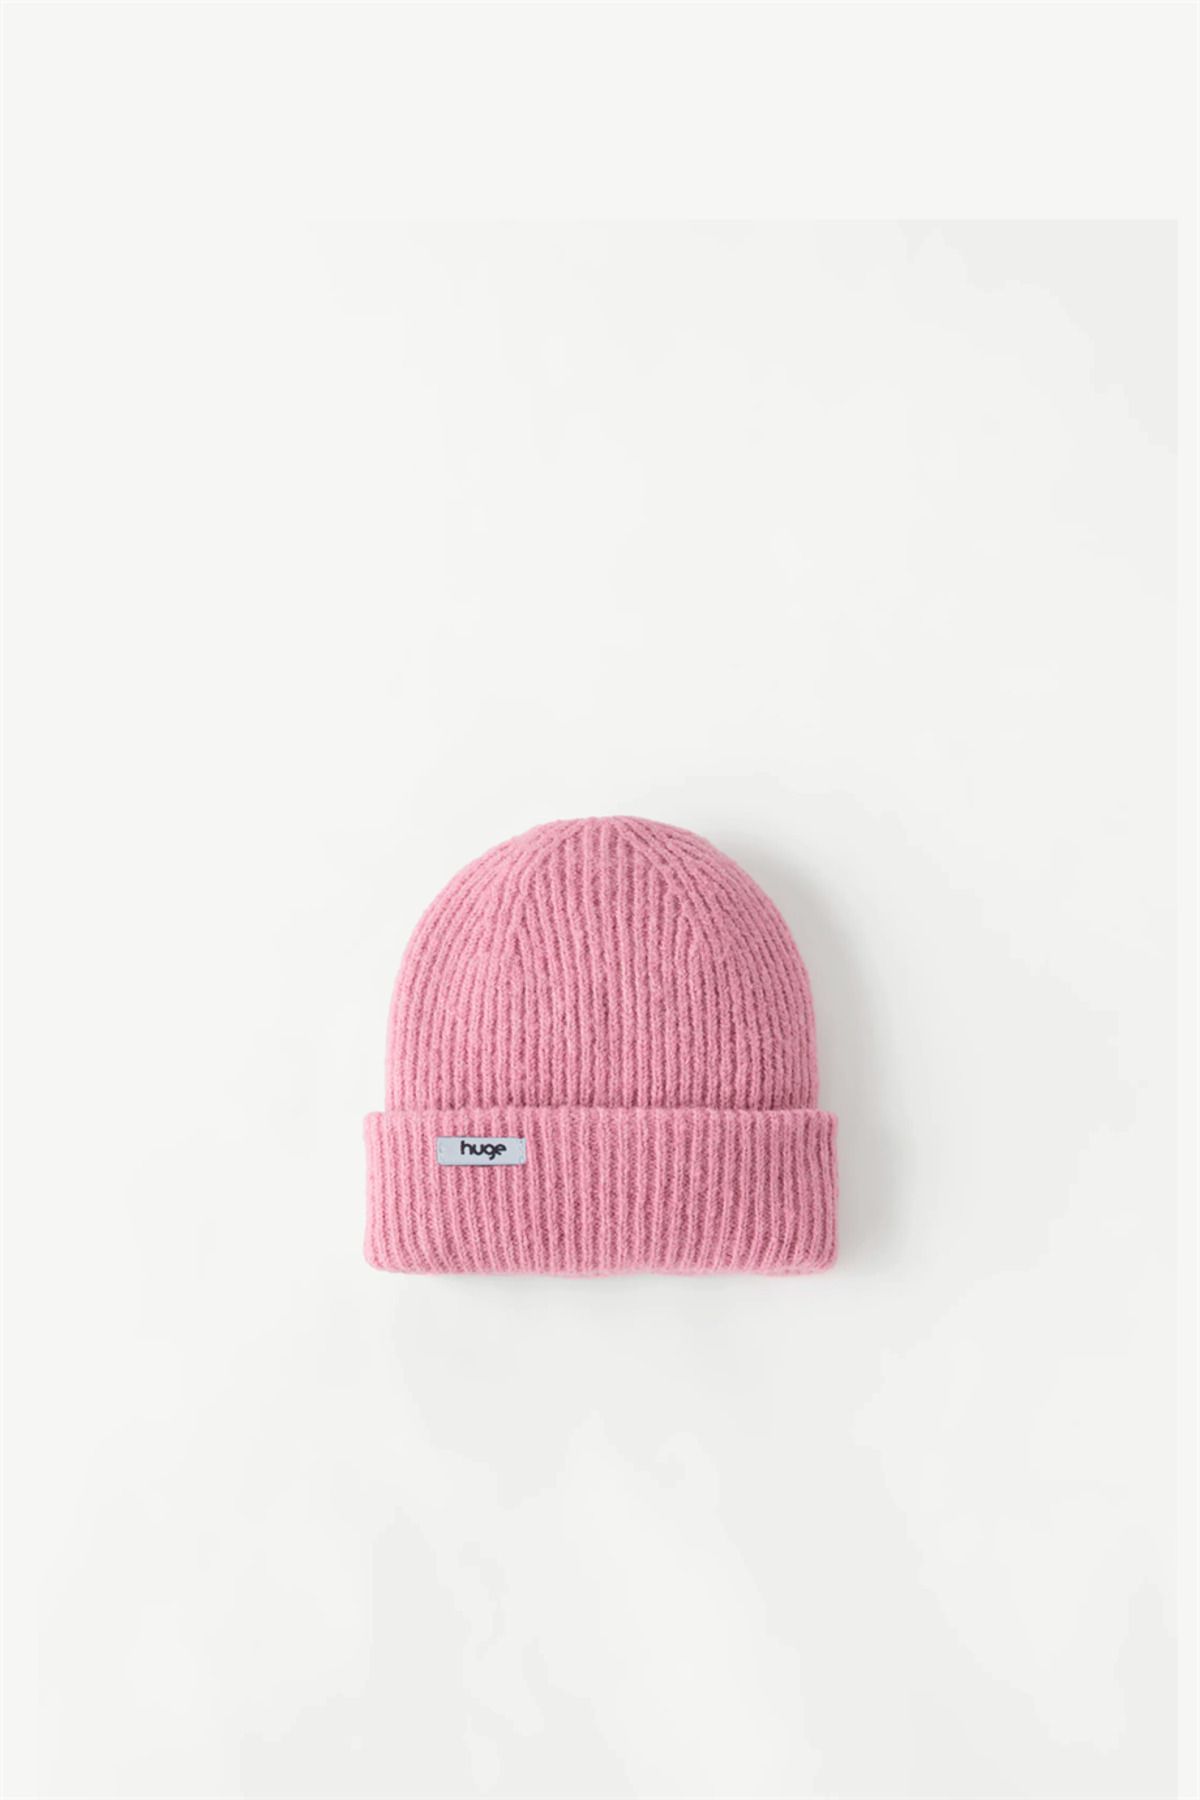 Huge Element Huge Beanie Small Tag Pink